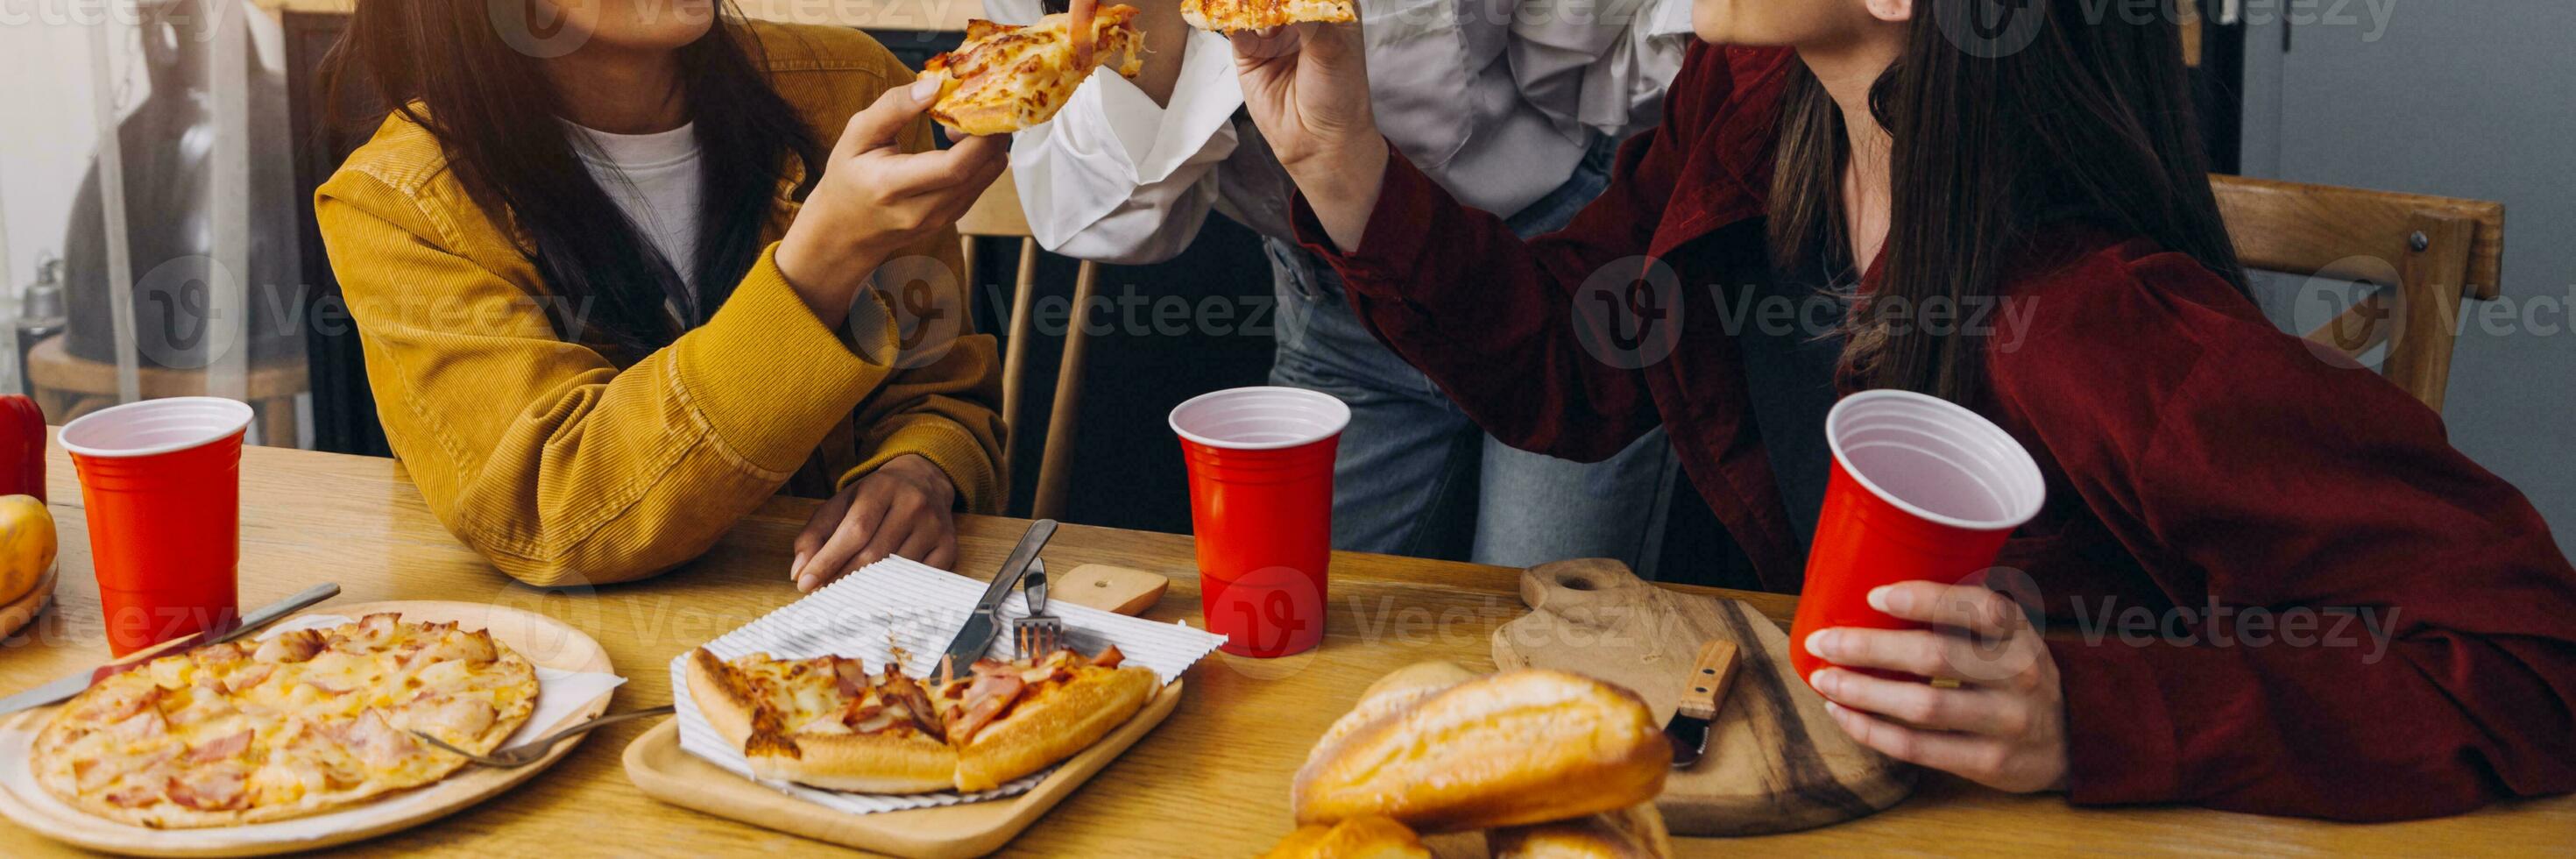 Laughing group of diverse young woman hanging out at home together and eating pizza photo